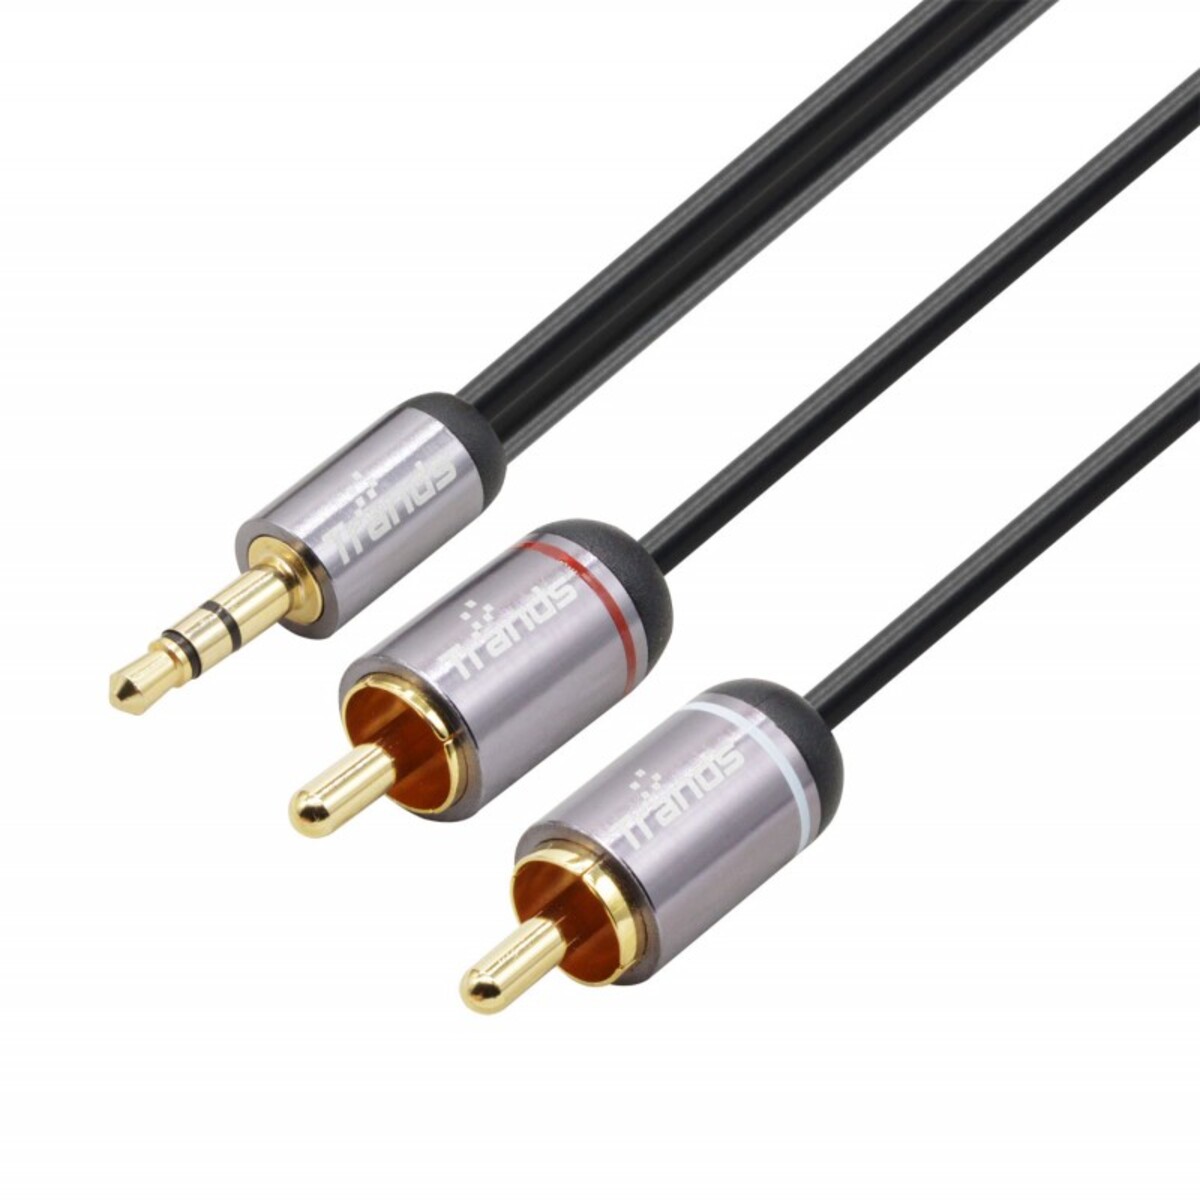 Trands 3.5mm To 2 RCA Audio Auxiliary Stereo Y Splitter Cable Male To Male 1 Meter Cable CA3187